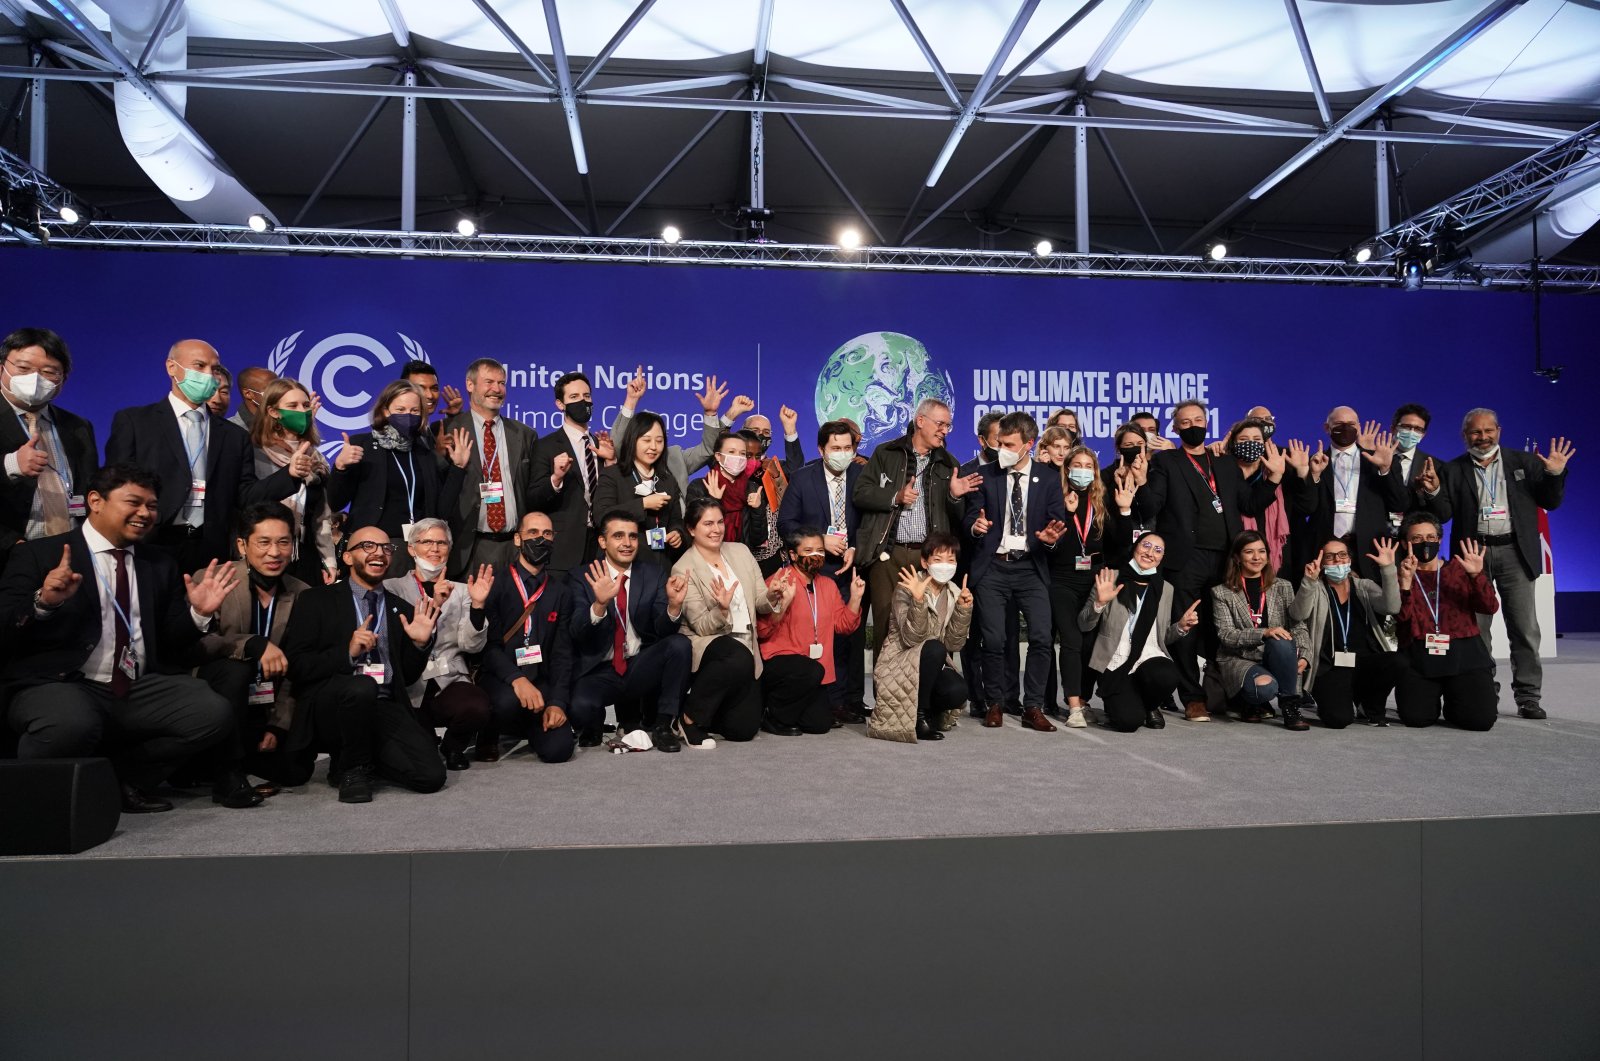 Delegates from different countries pose for a group photograph together on stage in the plenary room at the COP26 U.N. Climate Summit, in Glasgow, Scotland, Nov. 13, 2021. (AP Photo)